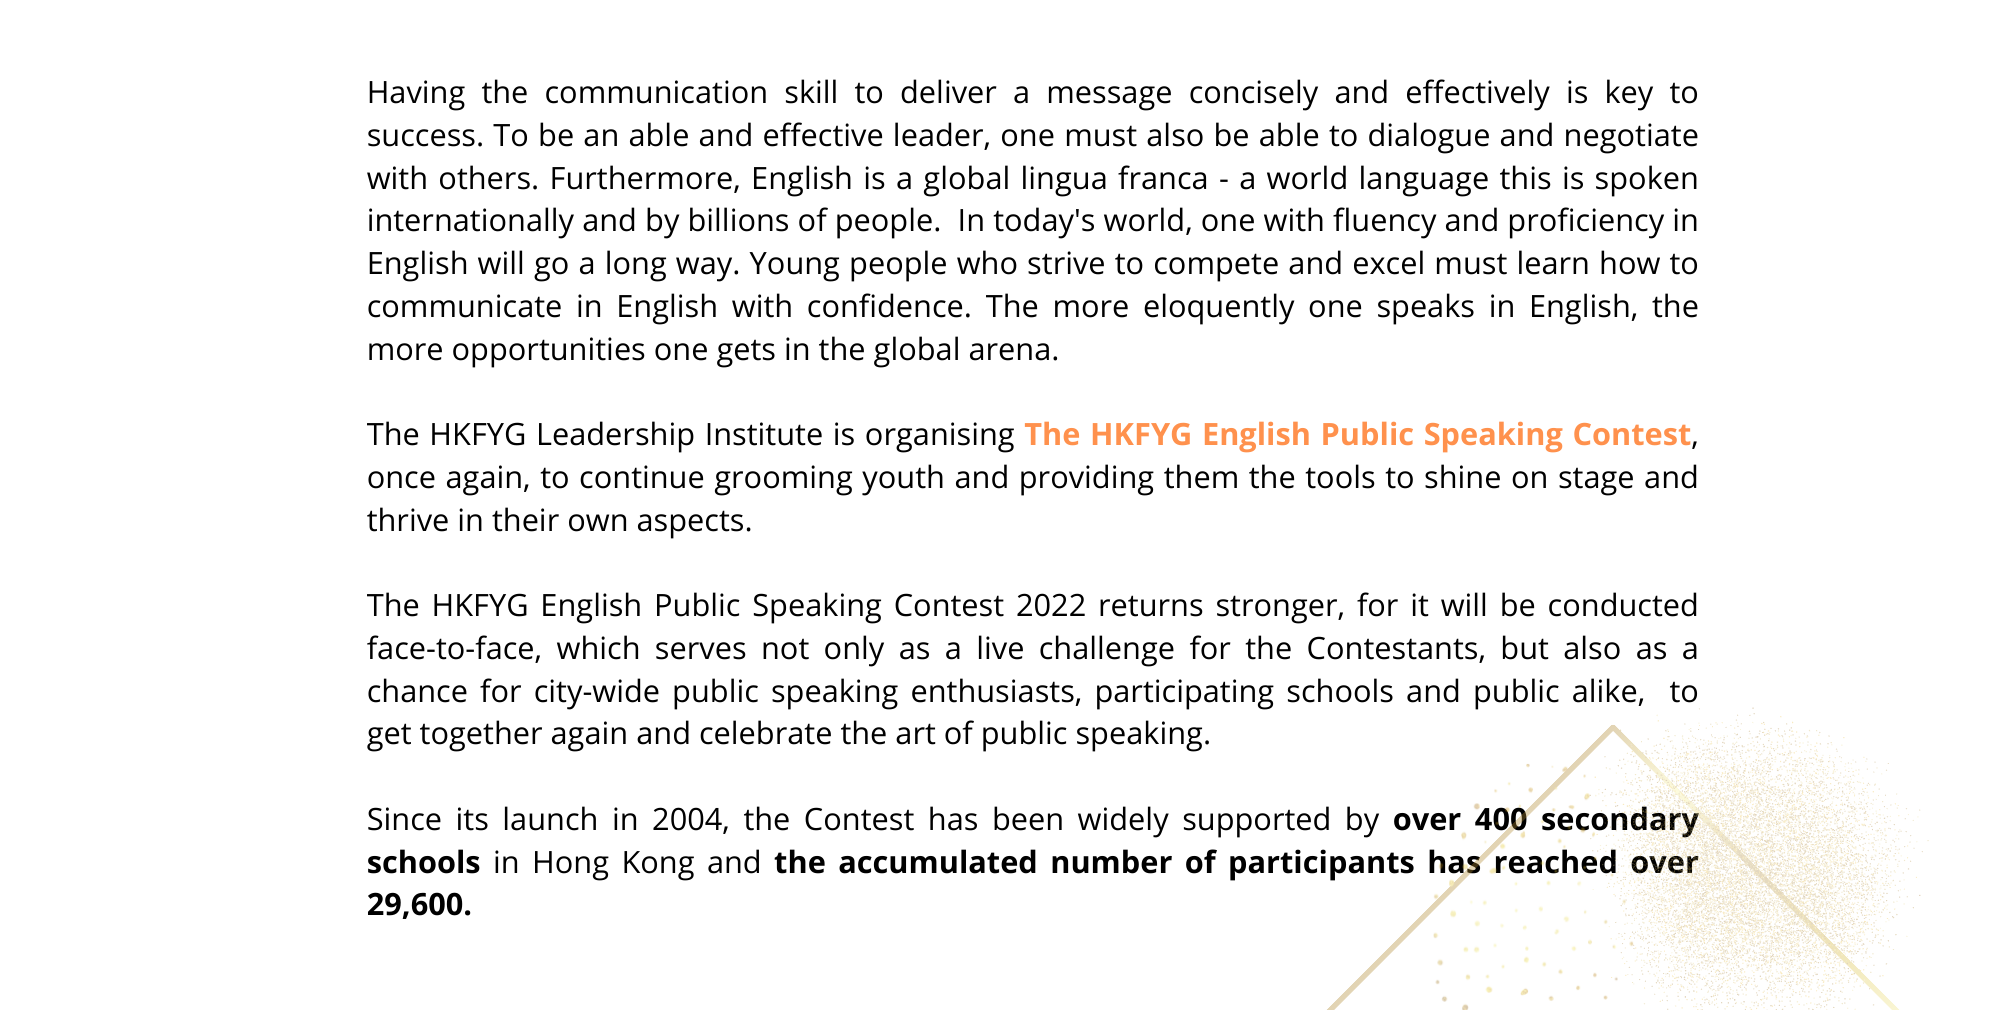 about the English public speaking contest